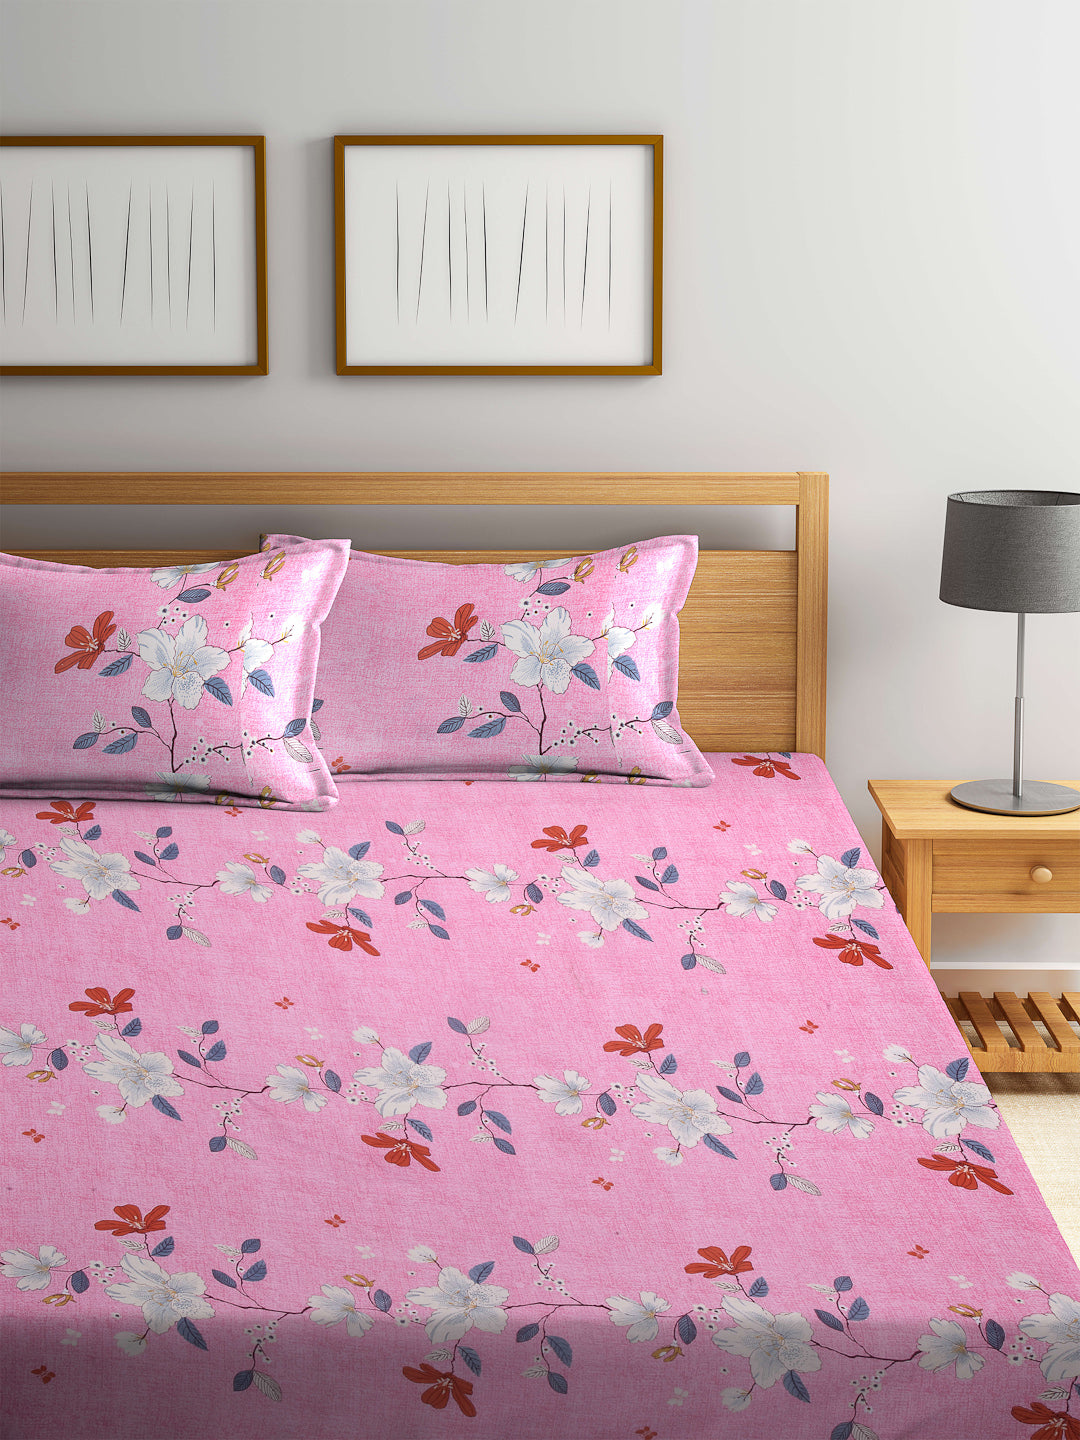 Arrabi Pink Floral TC Cotton Blend Double Size Fitted Bedsheet with 2 Pillow Cover ( 250 x 225 cm)